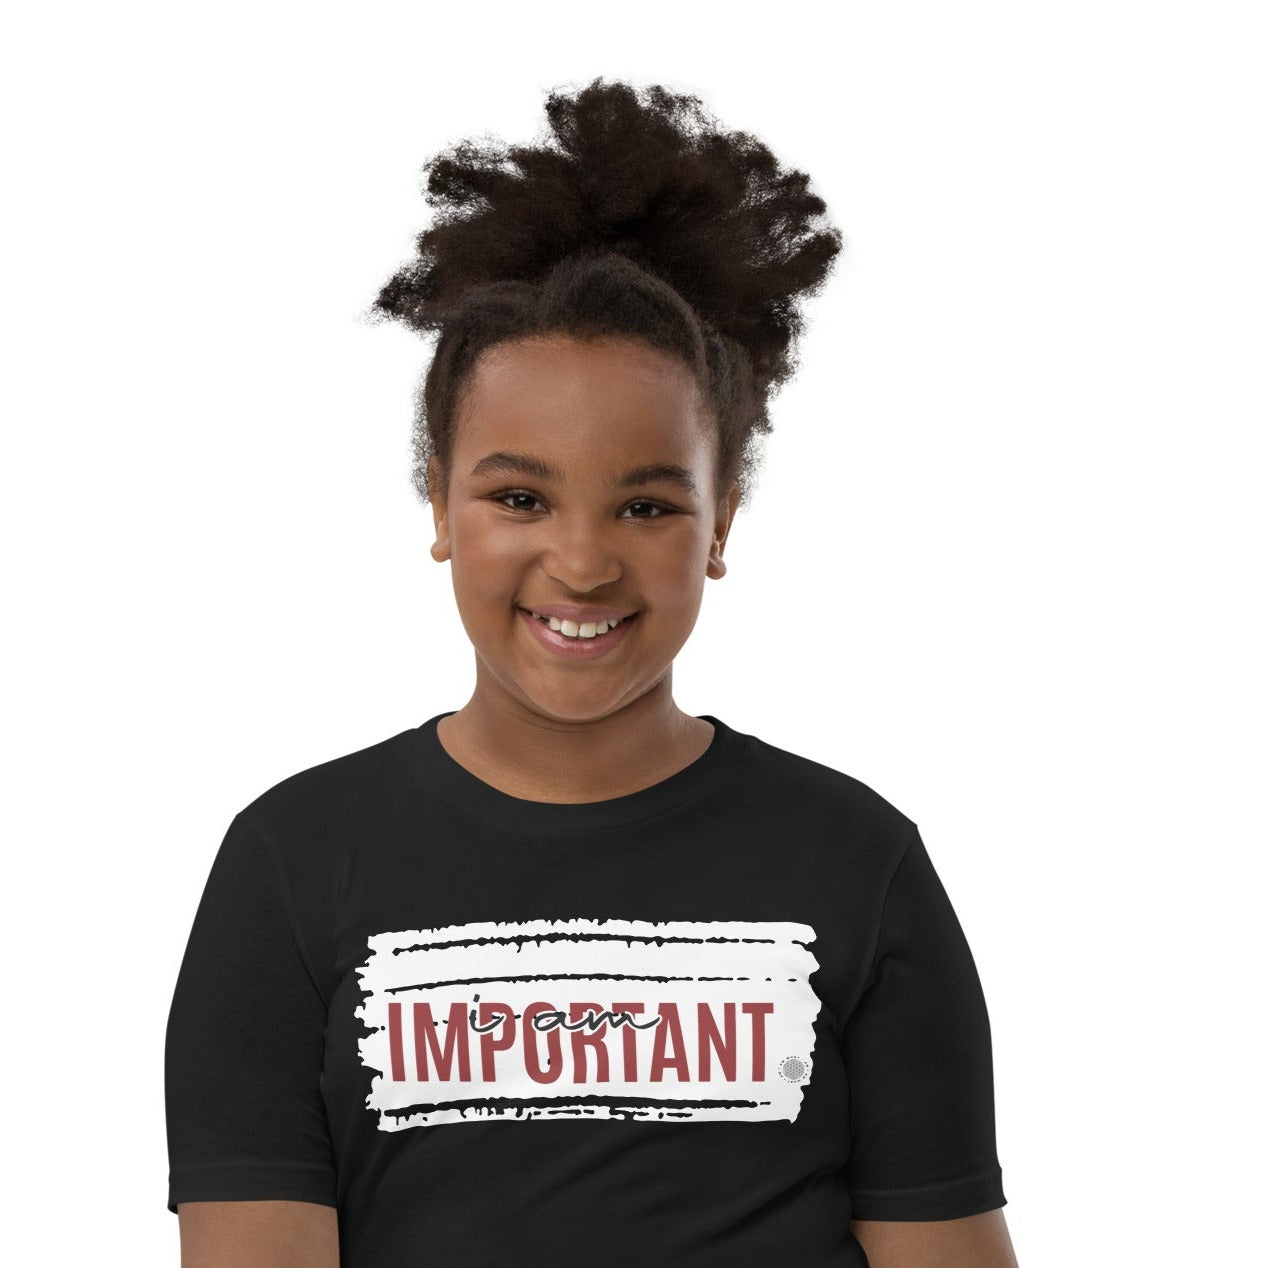 Our ‘I Am Important’ affirmation youth t-shirt describes your son or daughter who stands out when he or she enters the room. They are the center of attention and want everyone to know so. Your child is the most important person in any room.